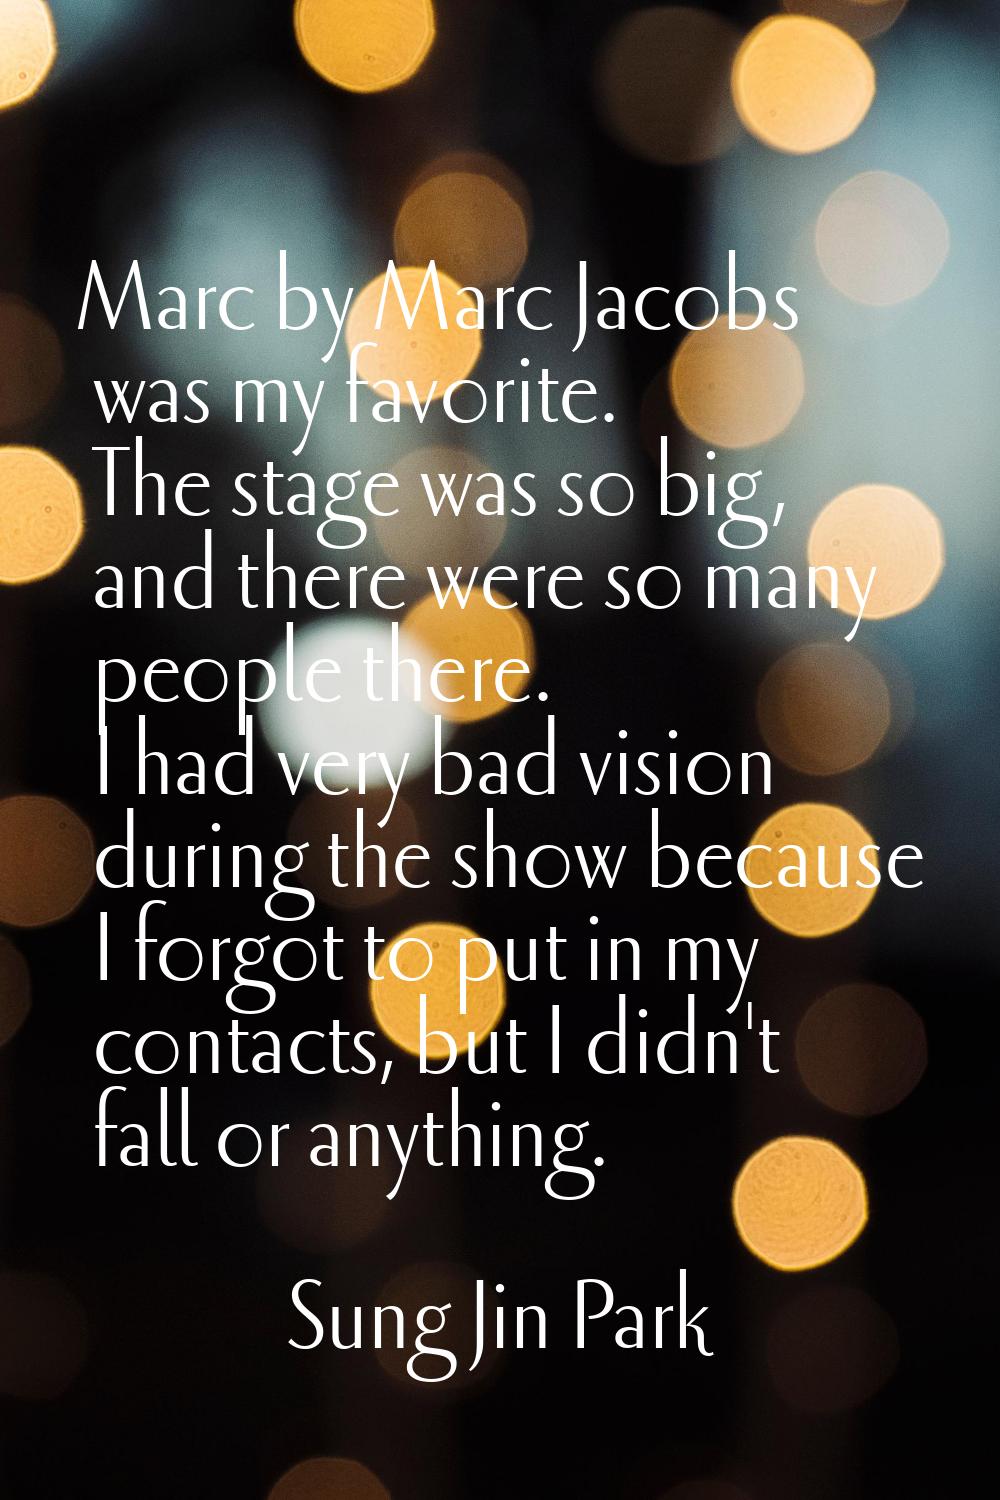 Marc by Marc Jacobs was my favorite. The stage was so big, and there were so many people there. I h